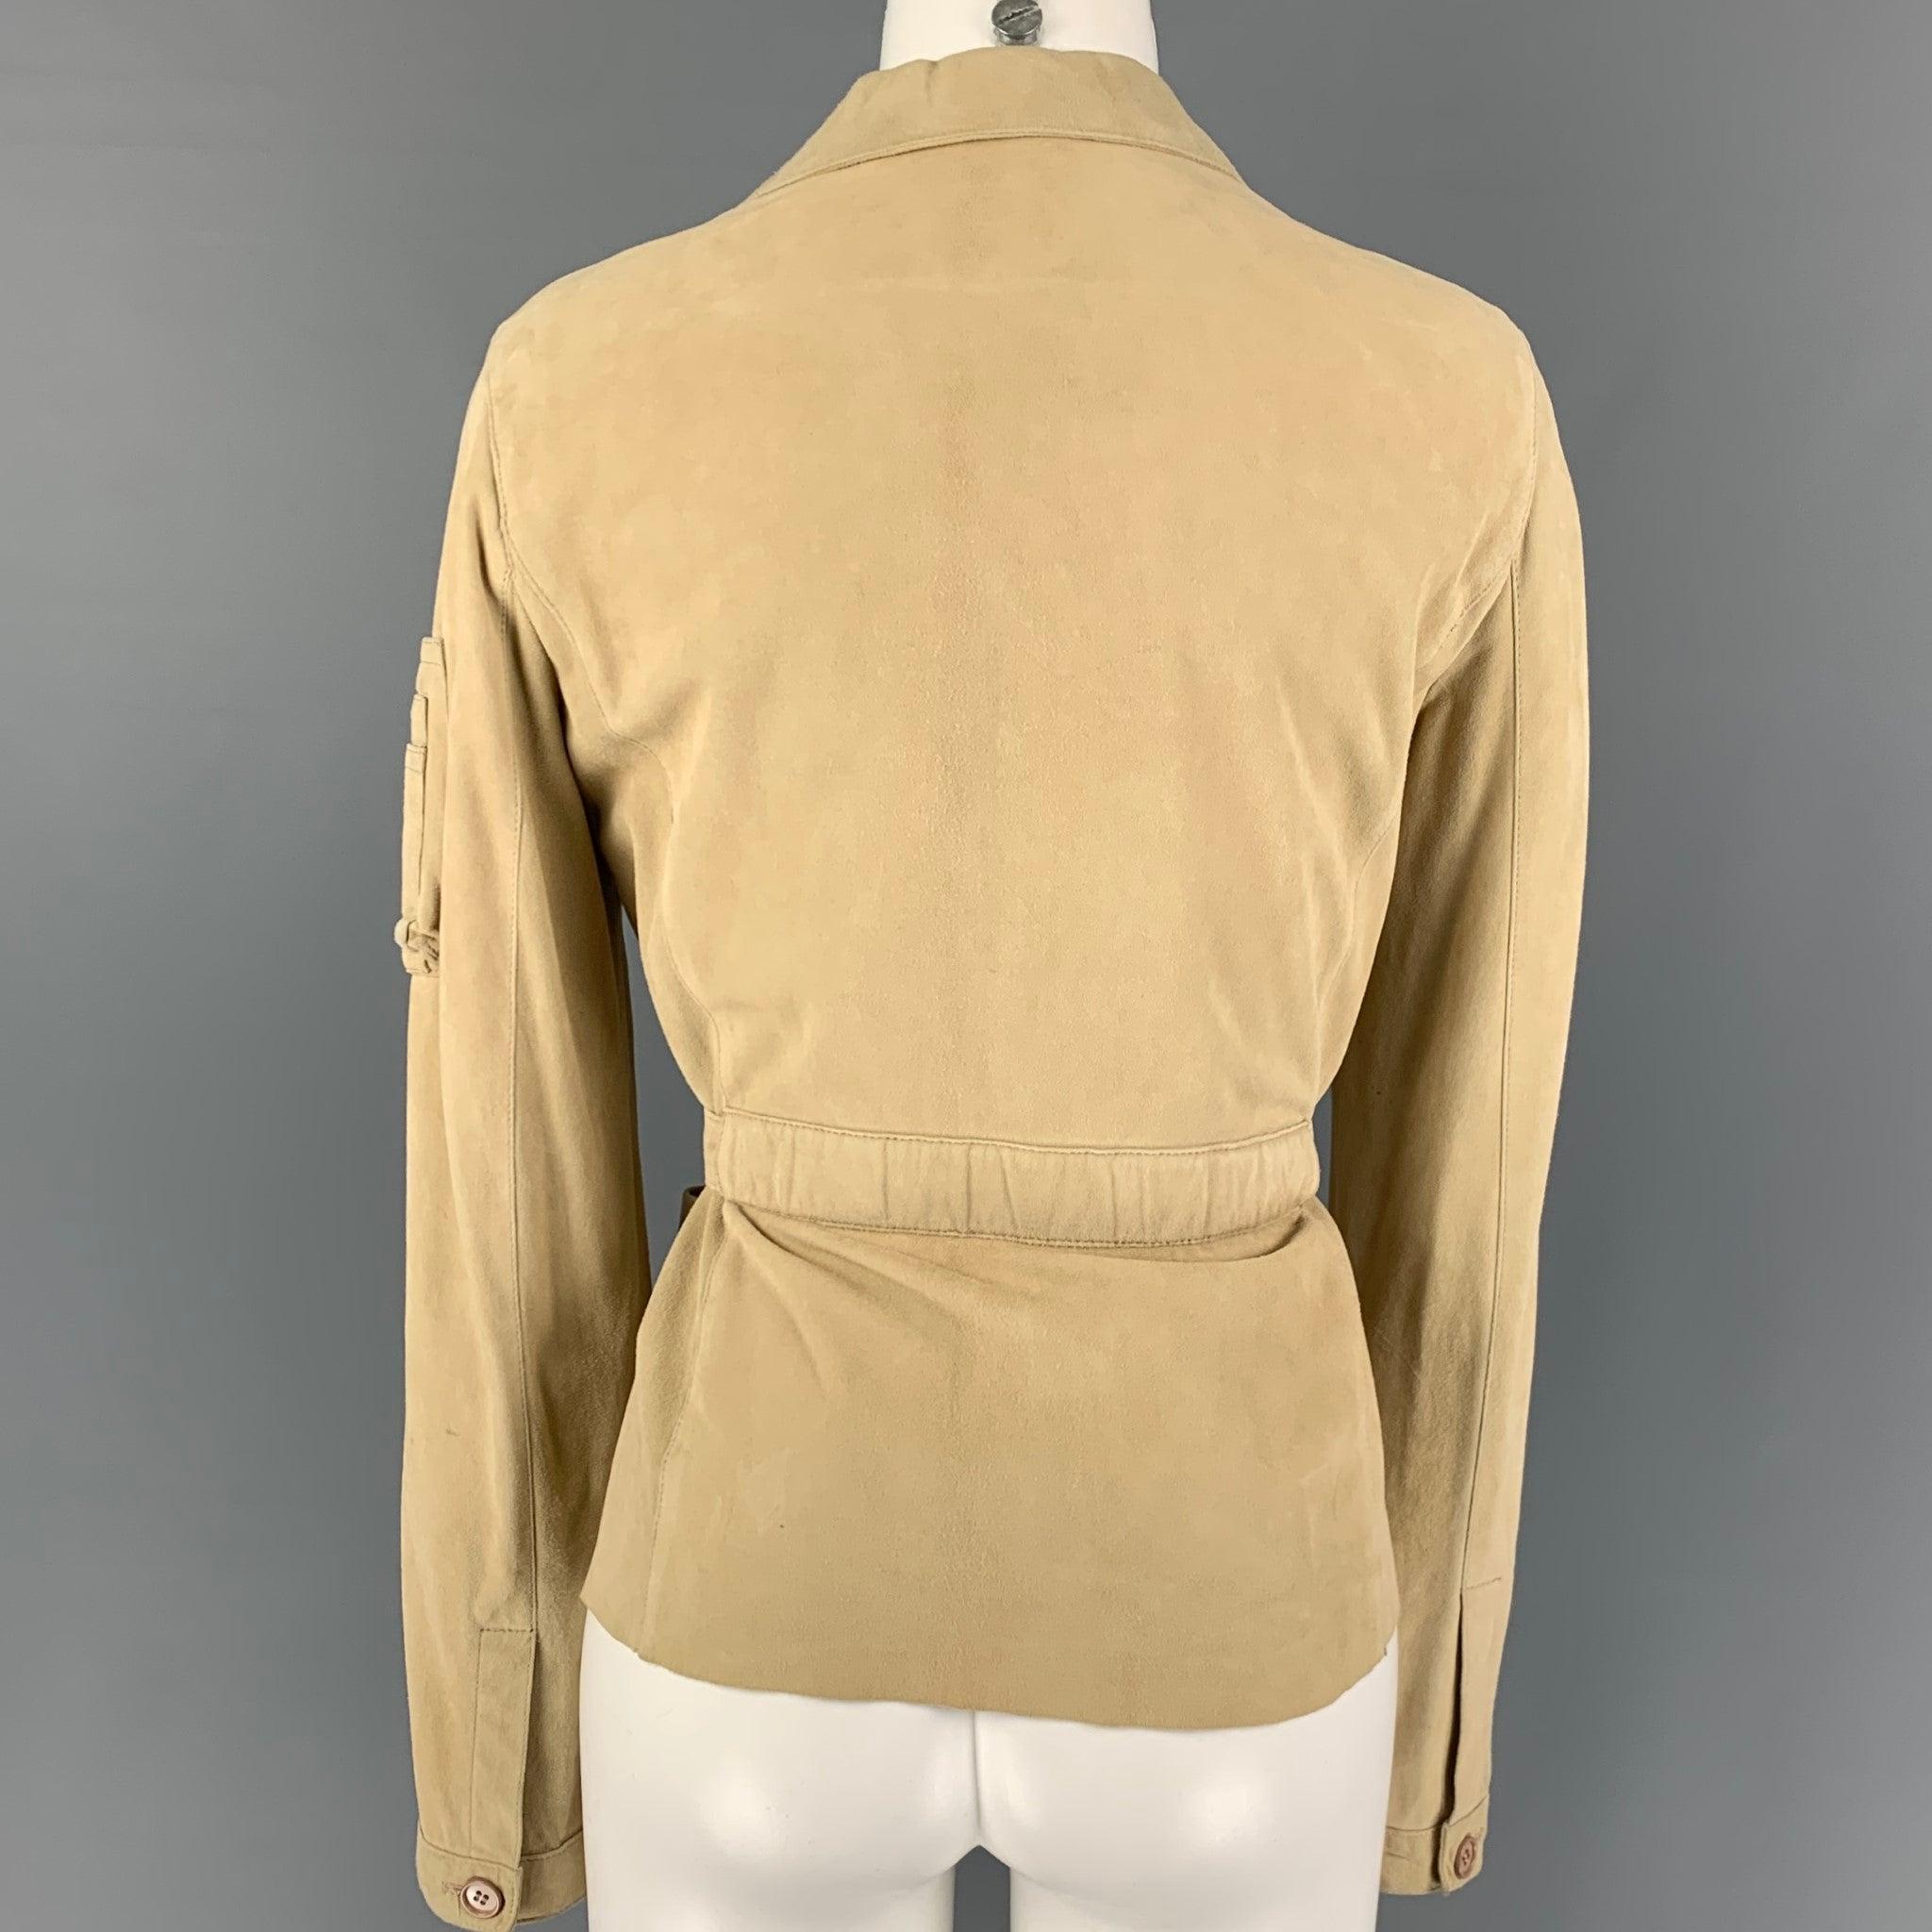 MIU MIU Size 4 Beige Suede Belted Jacket In Good Condition For Sale In San Francisco, CA